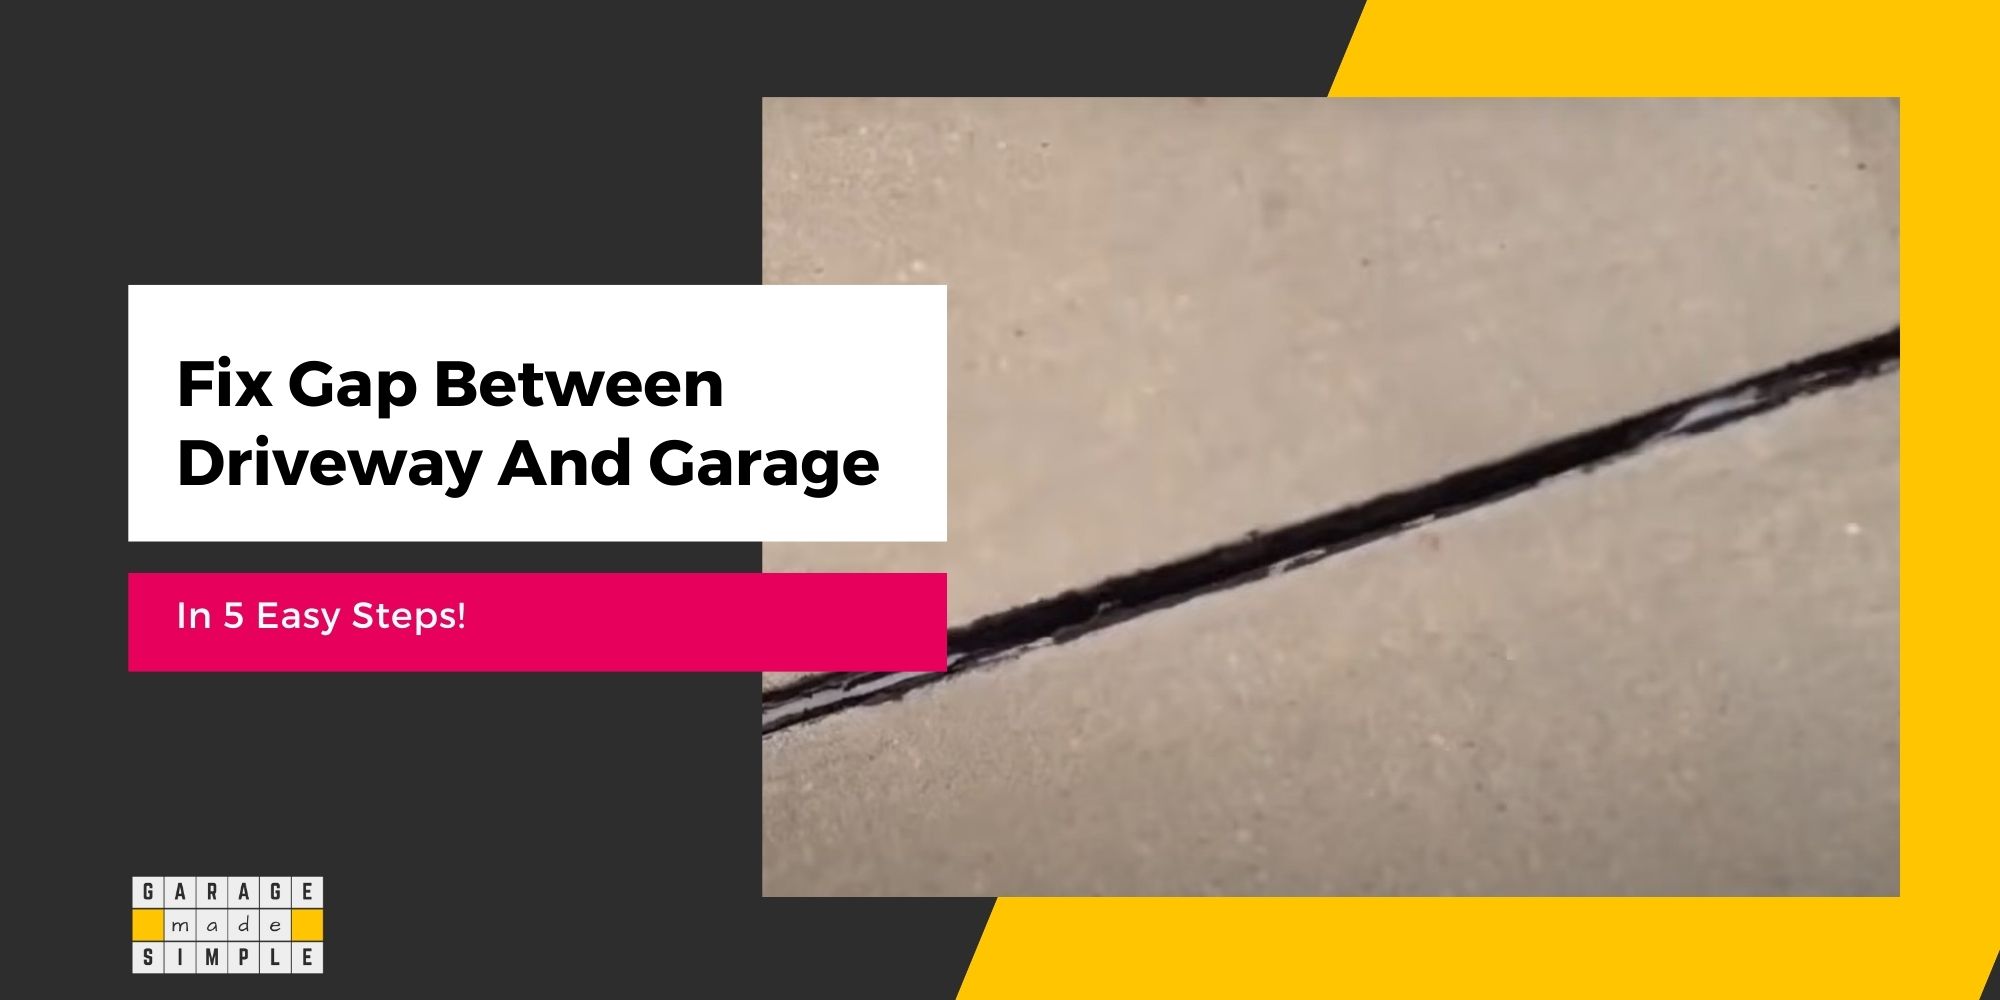 How To Fix Gap Between Driveway And Garage In 5 Easy Steps!